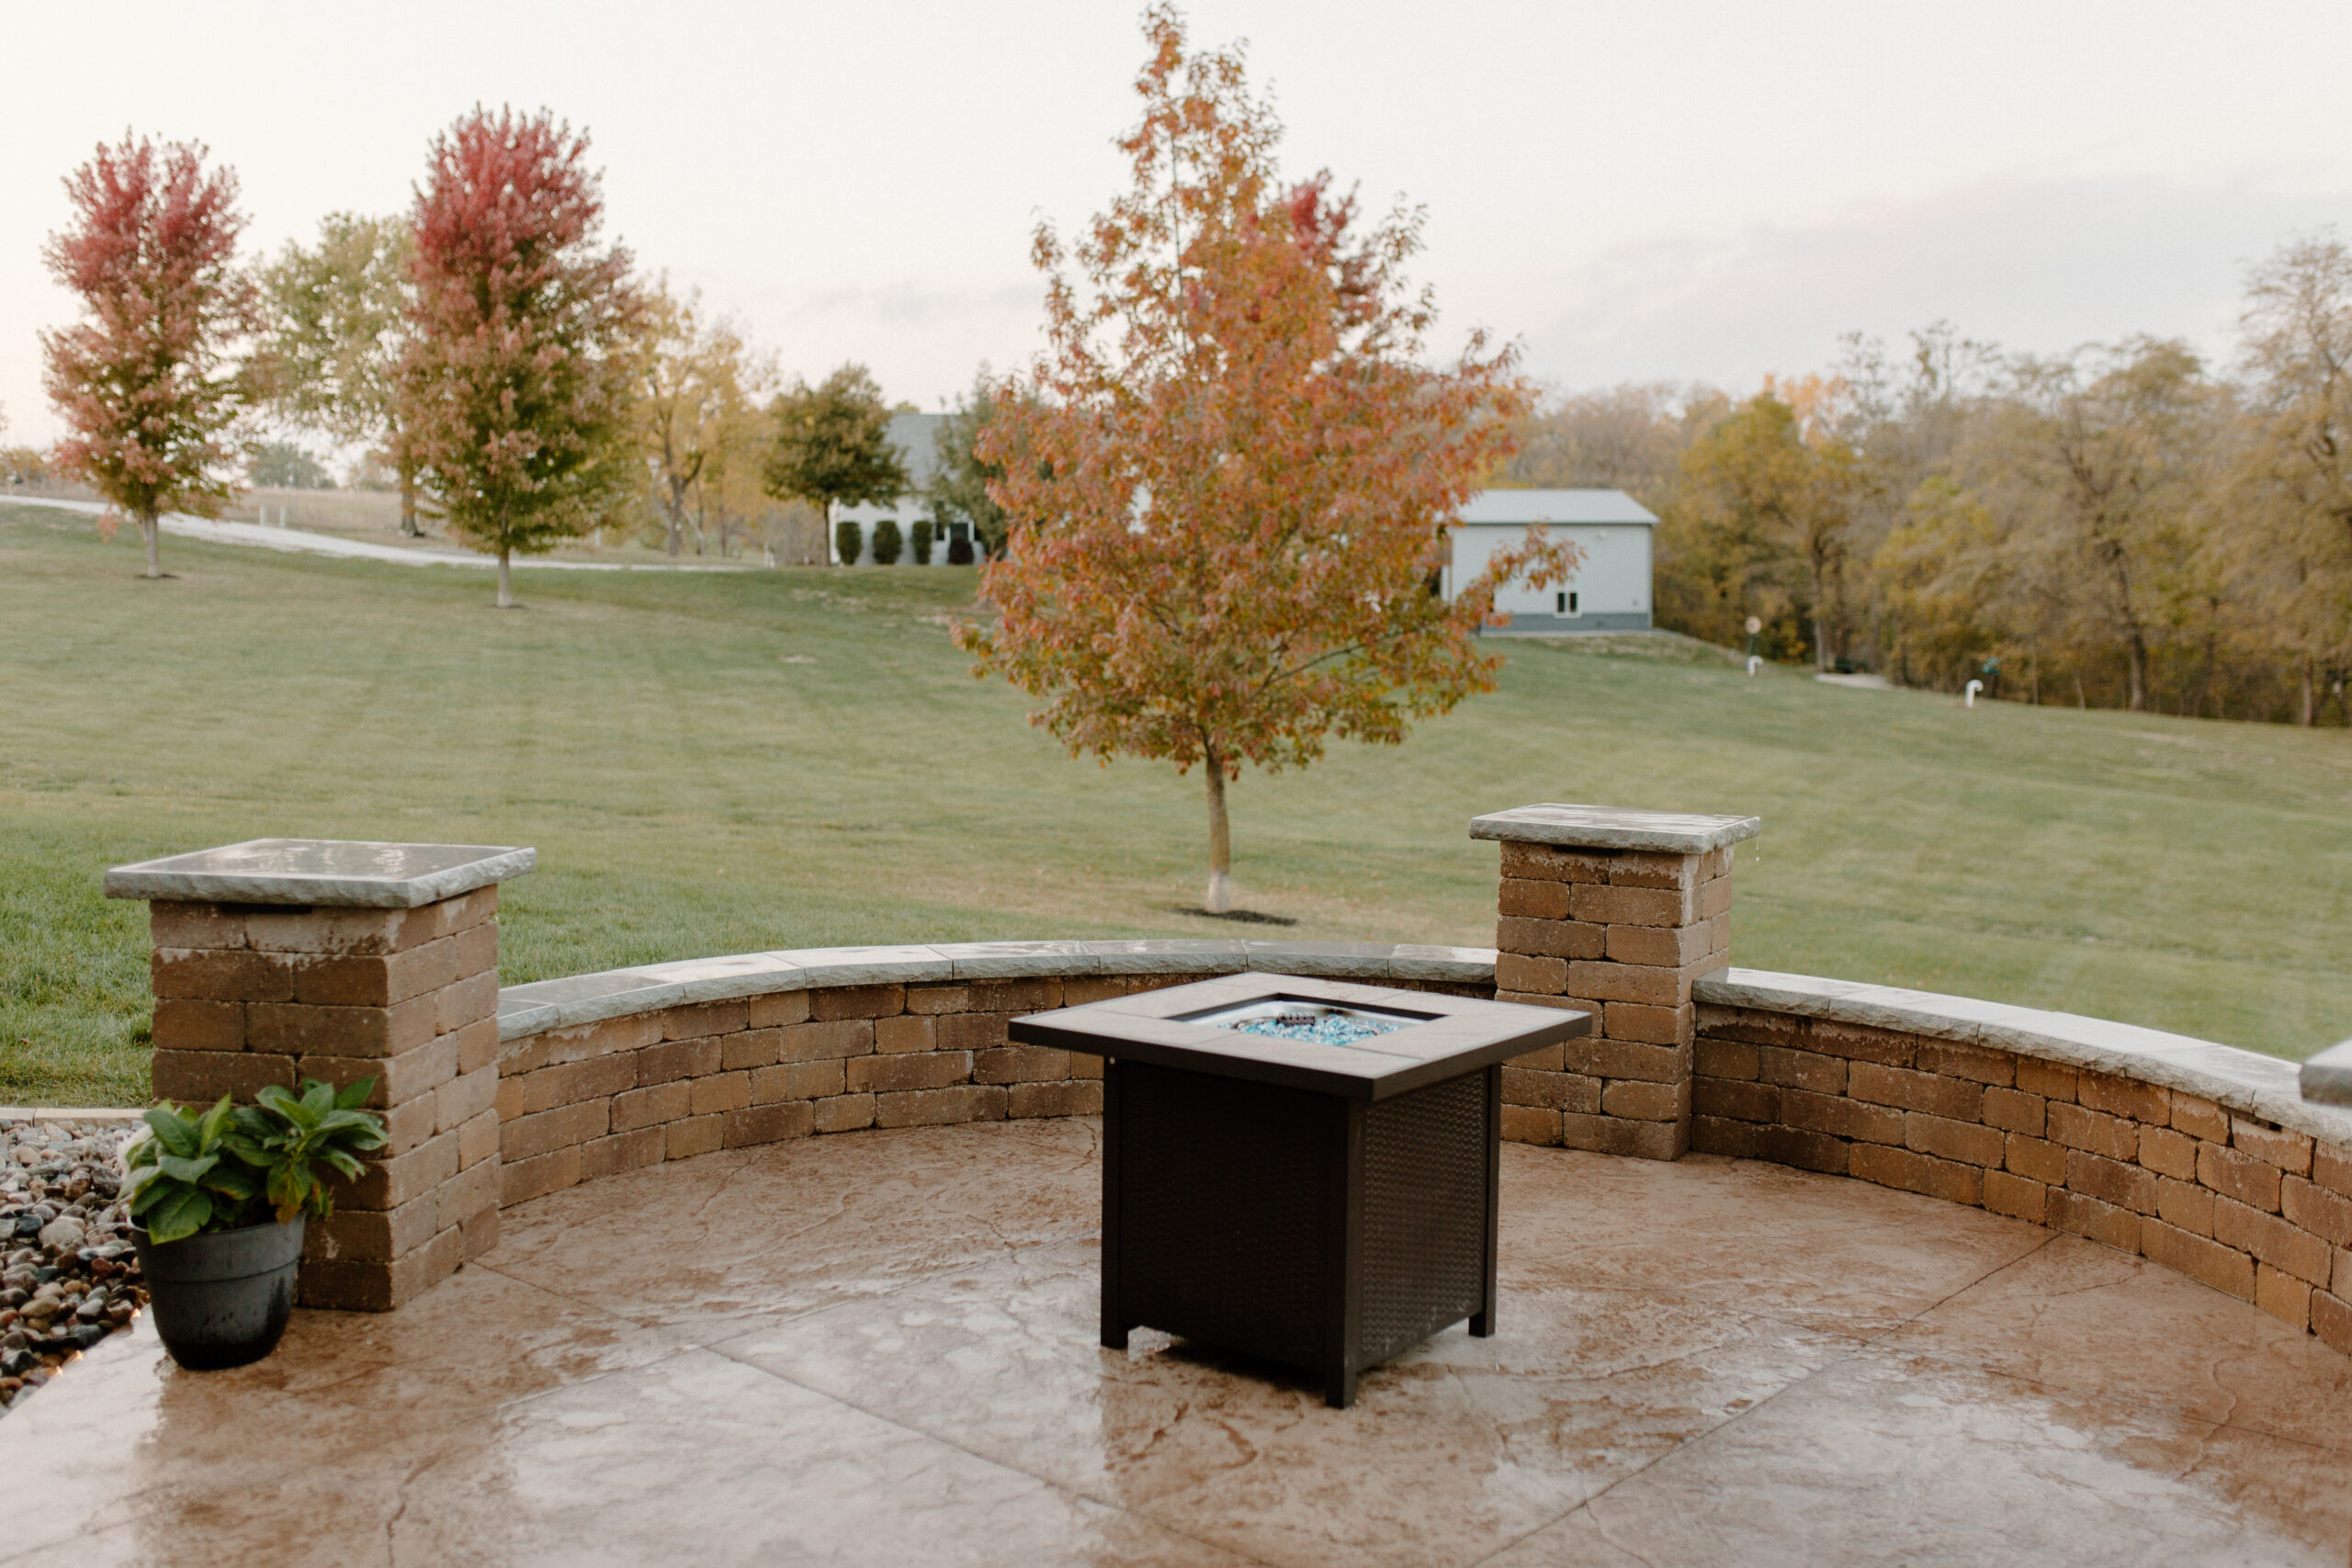 Fire pit on a patio surrounded by a stone seating semicircle with new trees planted in the background - Des Moines, Iowa Landscape Design